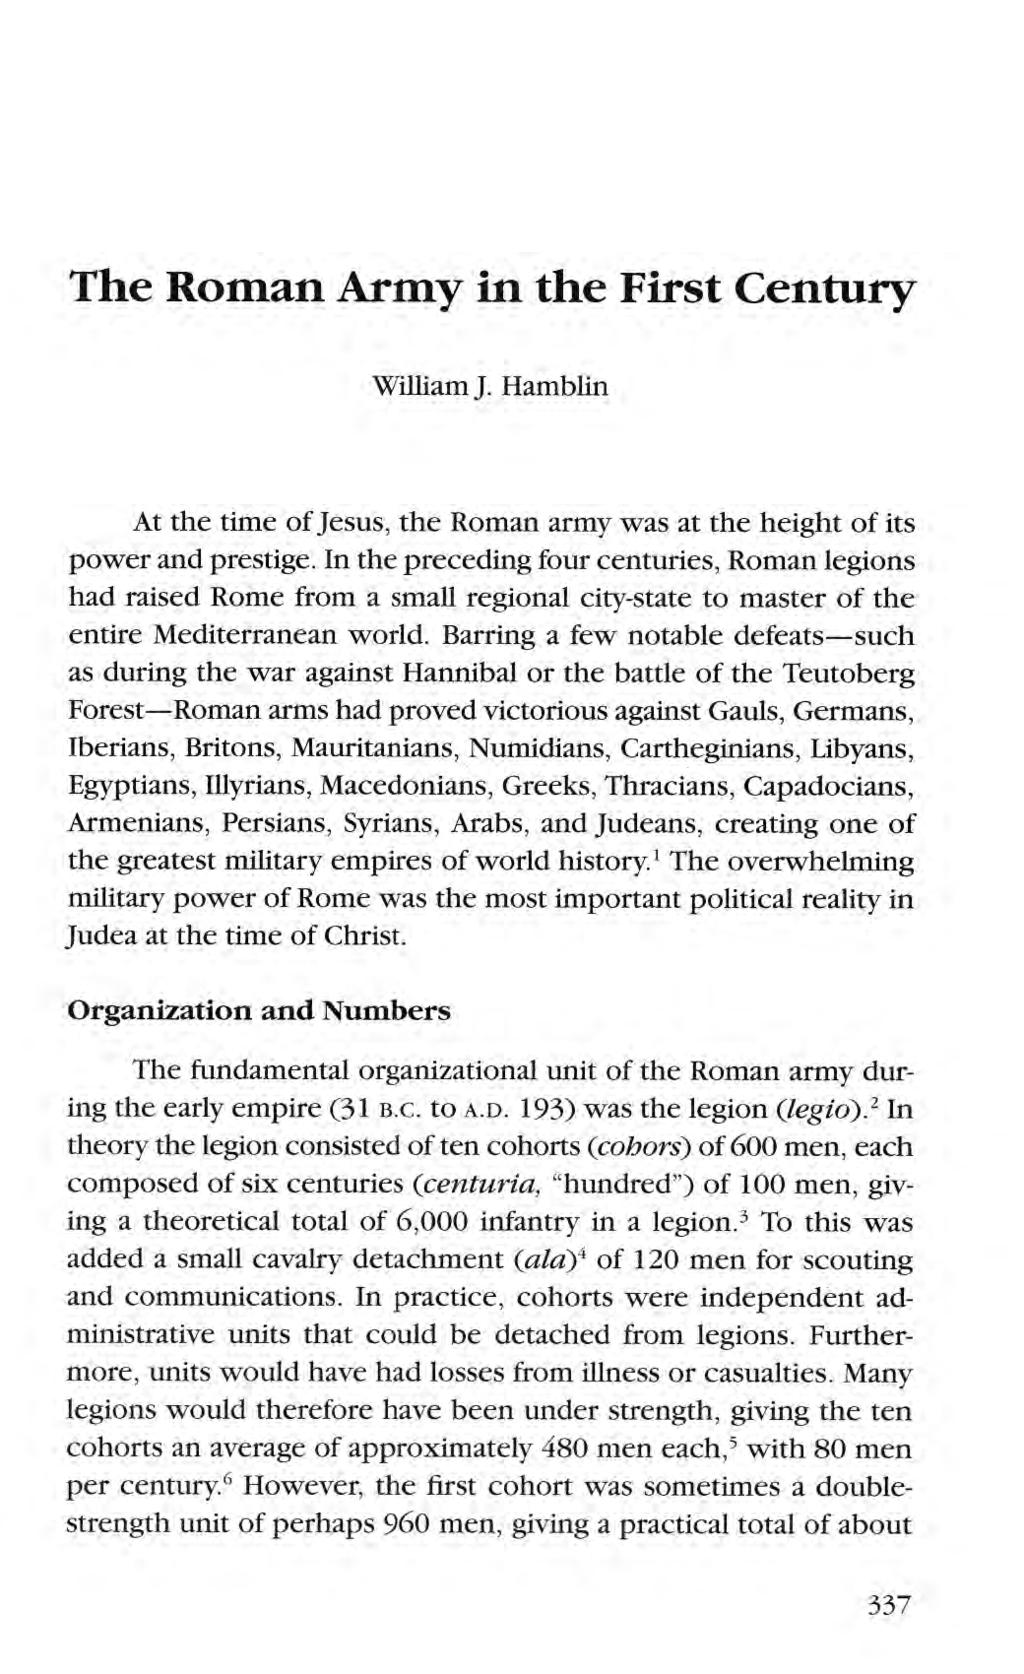 Hamblin: The Roman Army in the First Century the roman army in the first century william J hamblin at the time ofjesus the roman army was at the height of its power and prestige in the preceding four